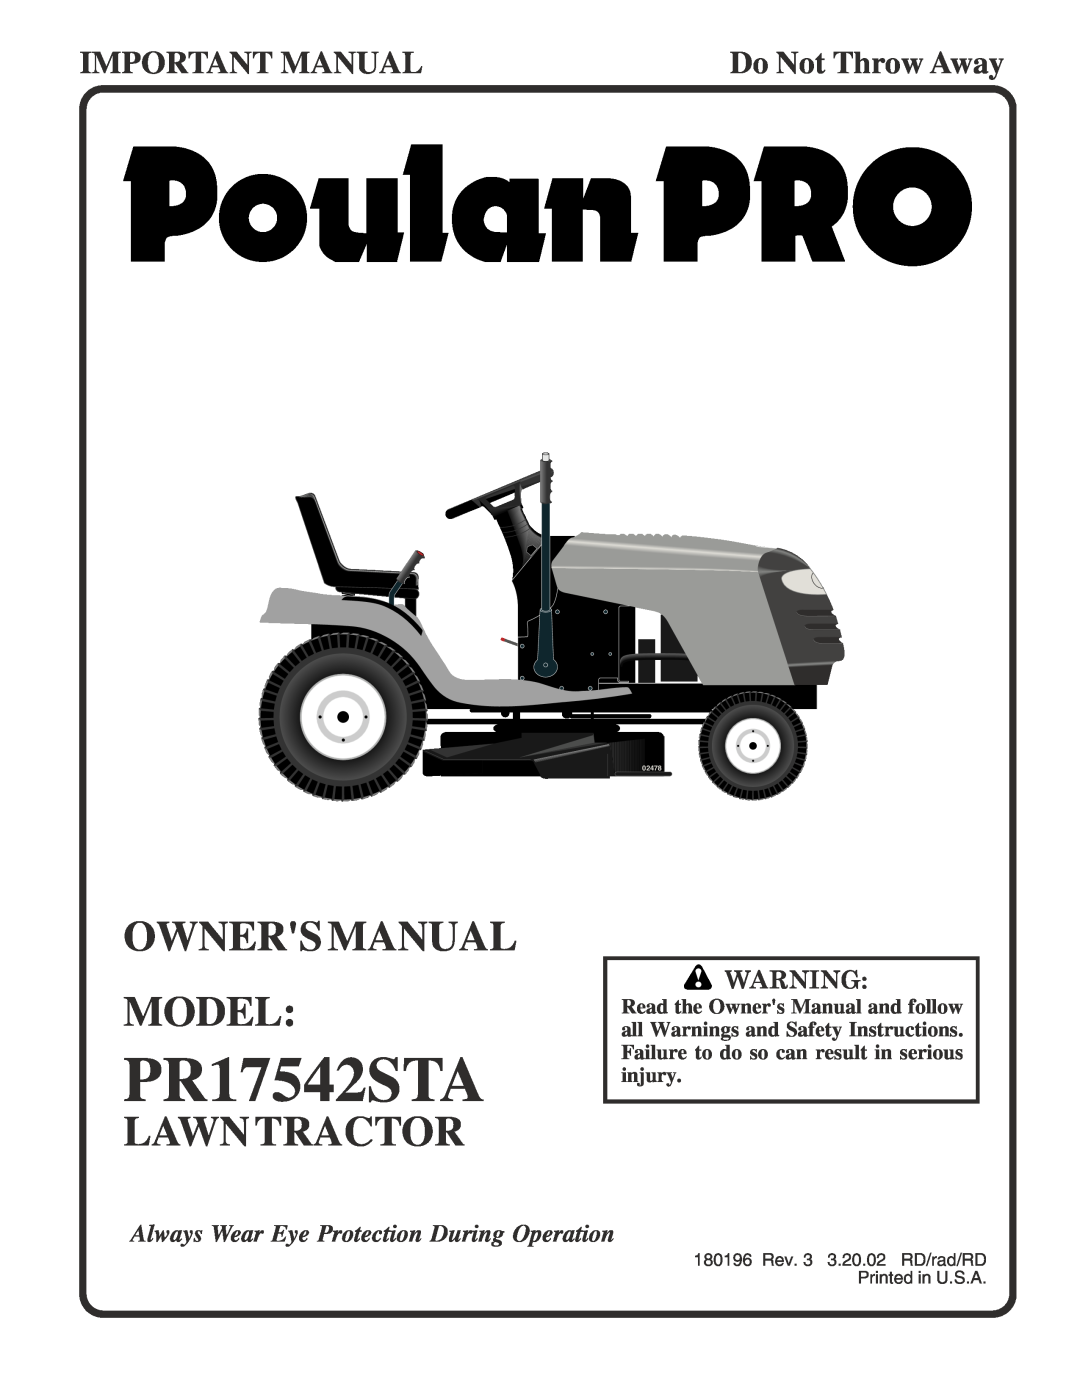 Poulan PR17542STA owner manual Lawntractor, Important Manual, Do Not Throw Away, 02478 